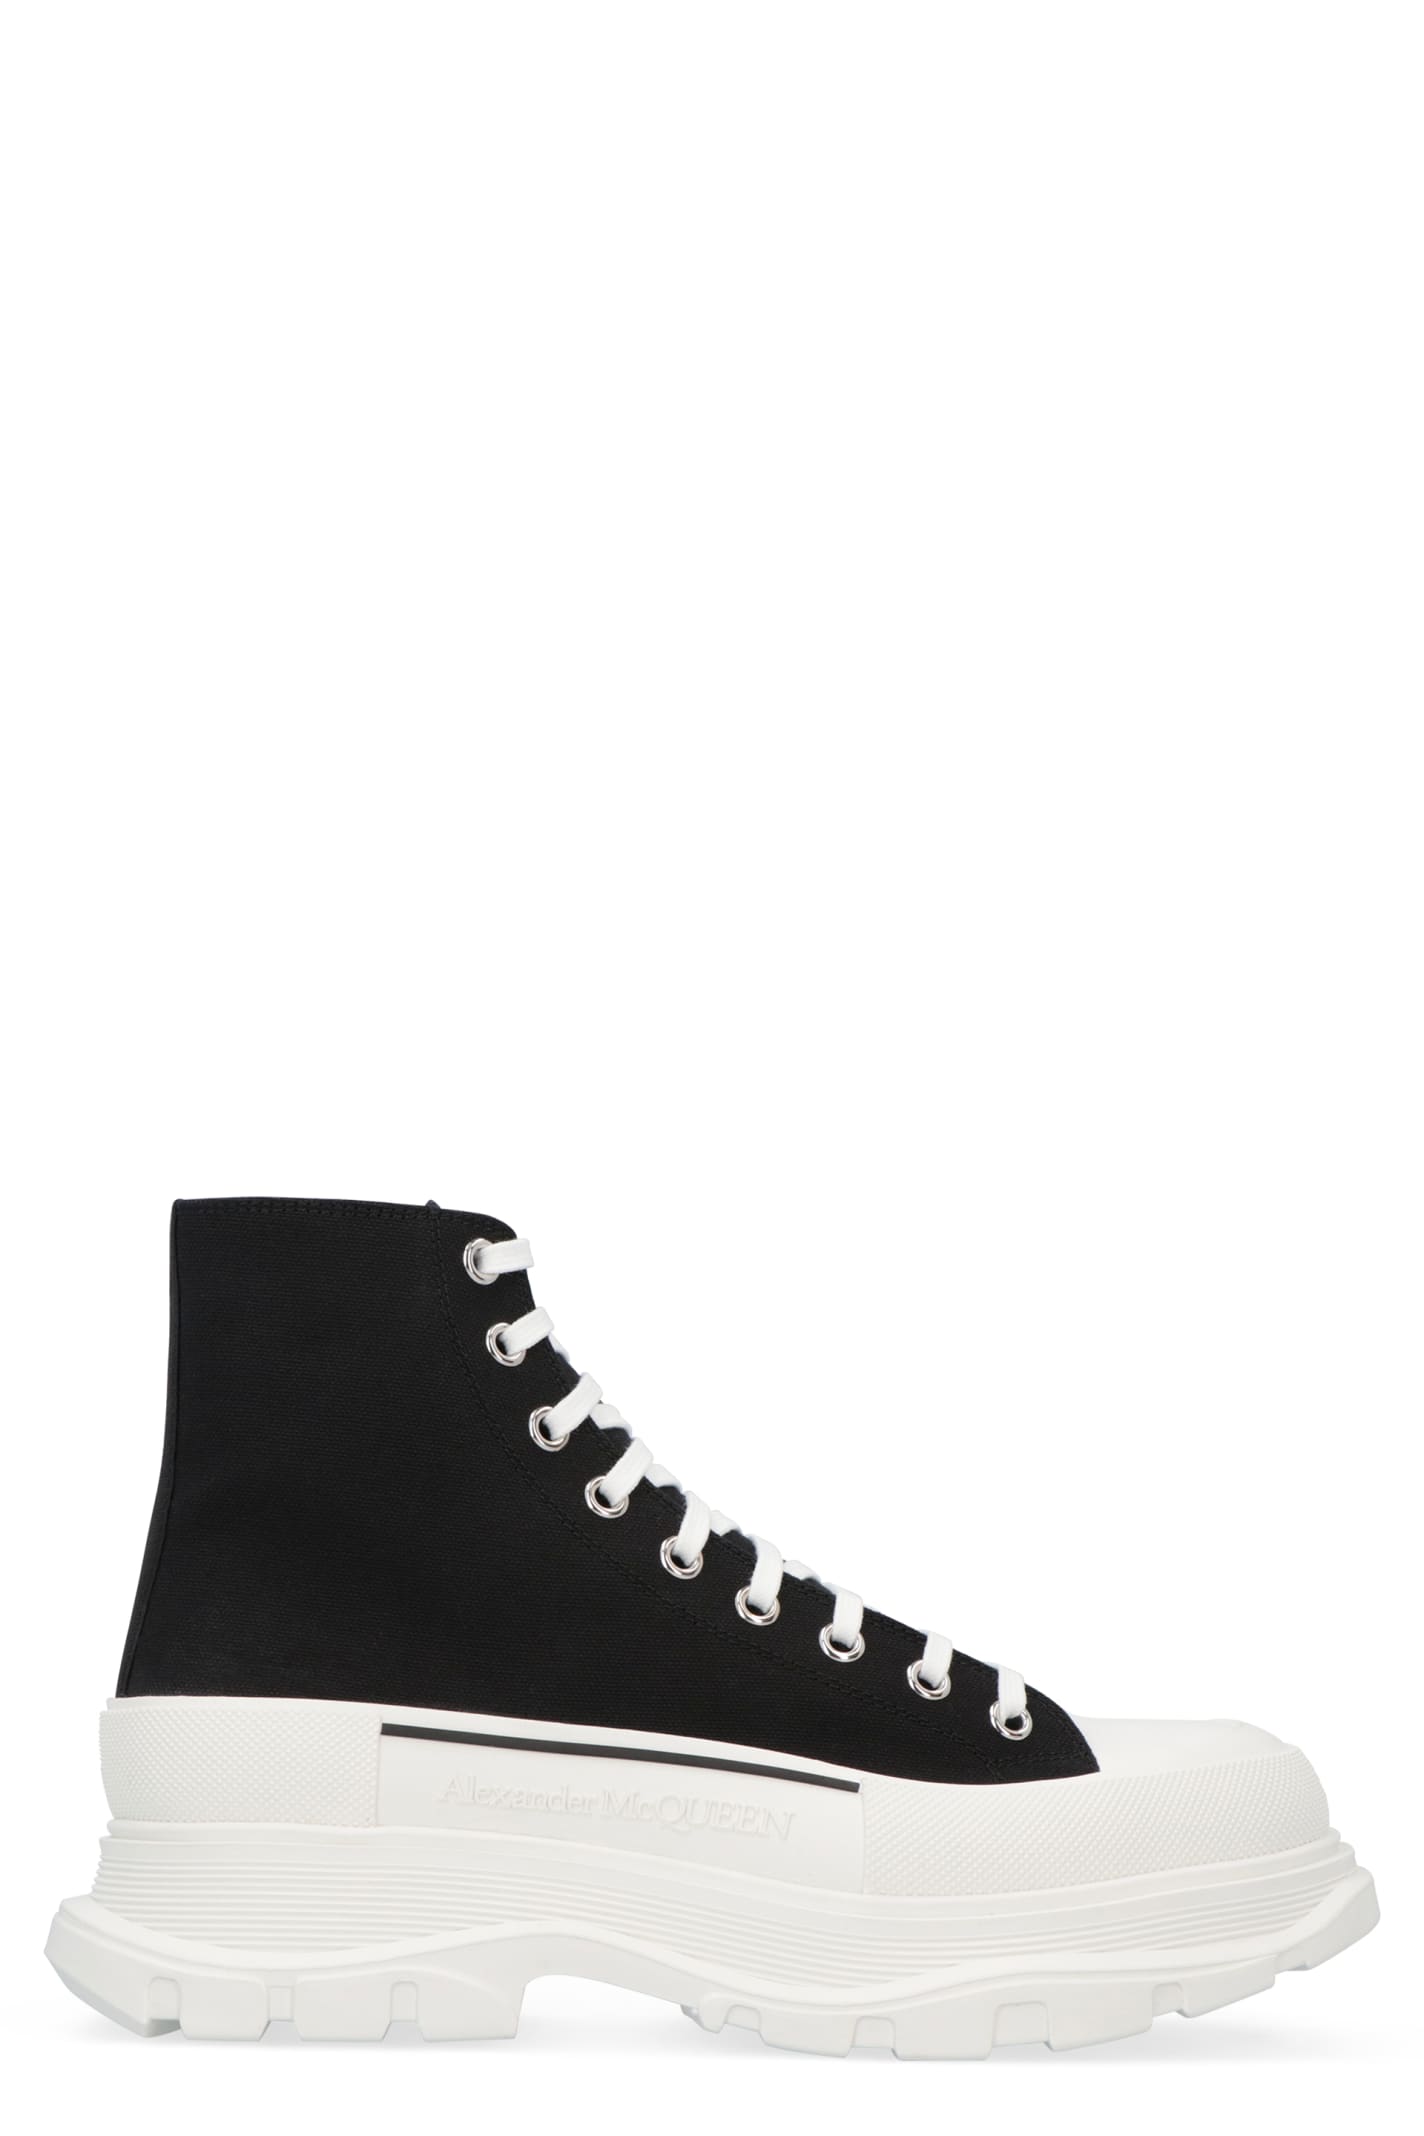 Alexander McQueen Tread Slick Lace-up Ankle Boots